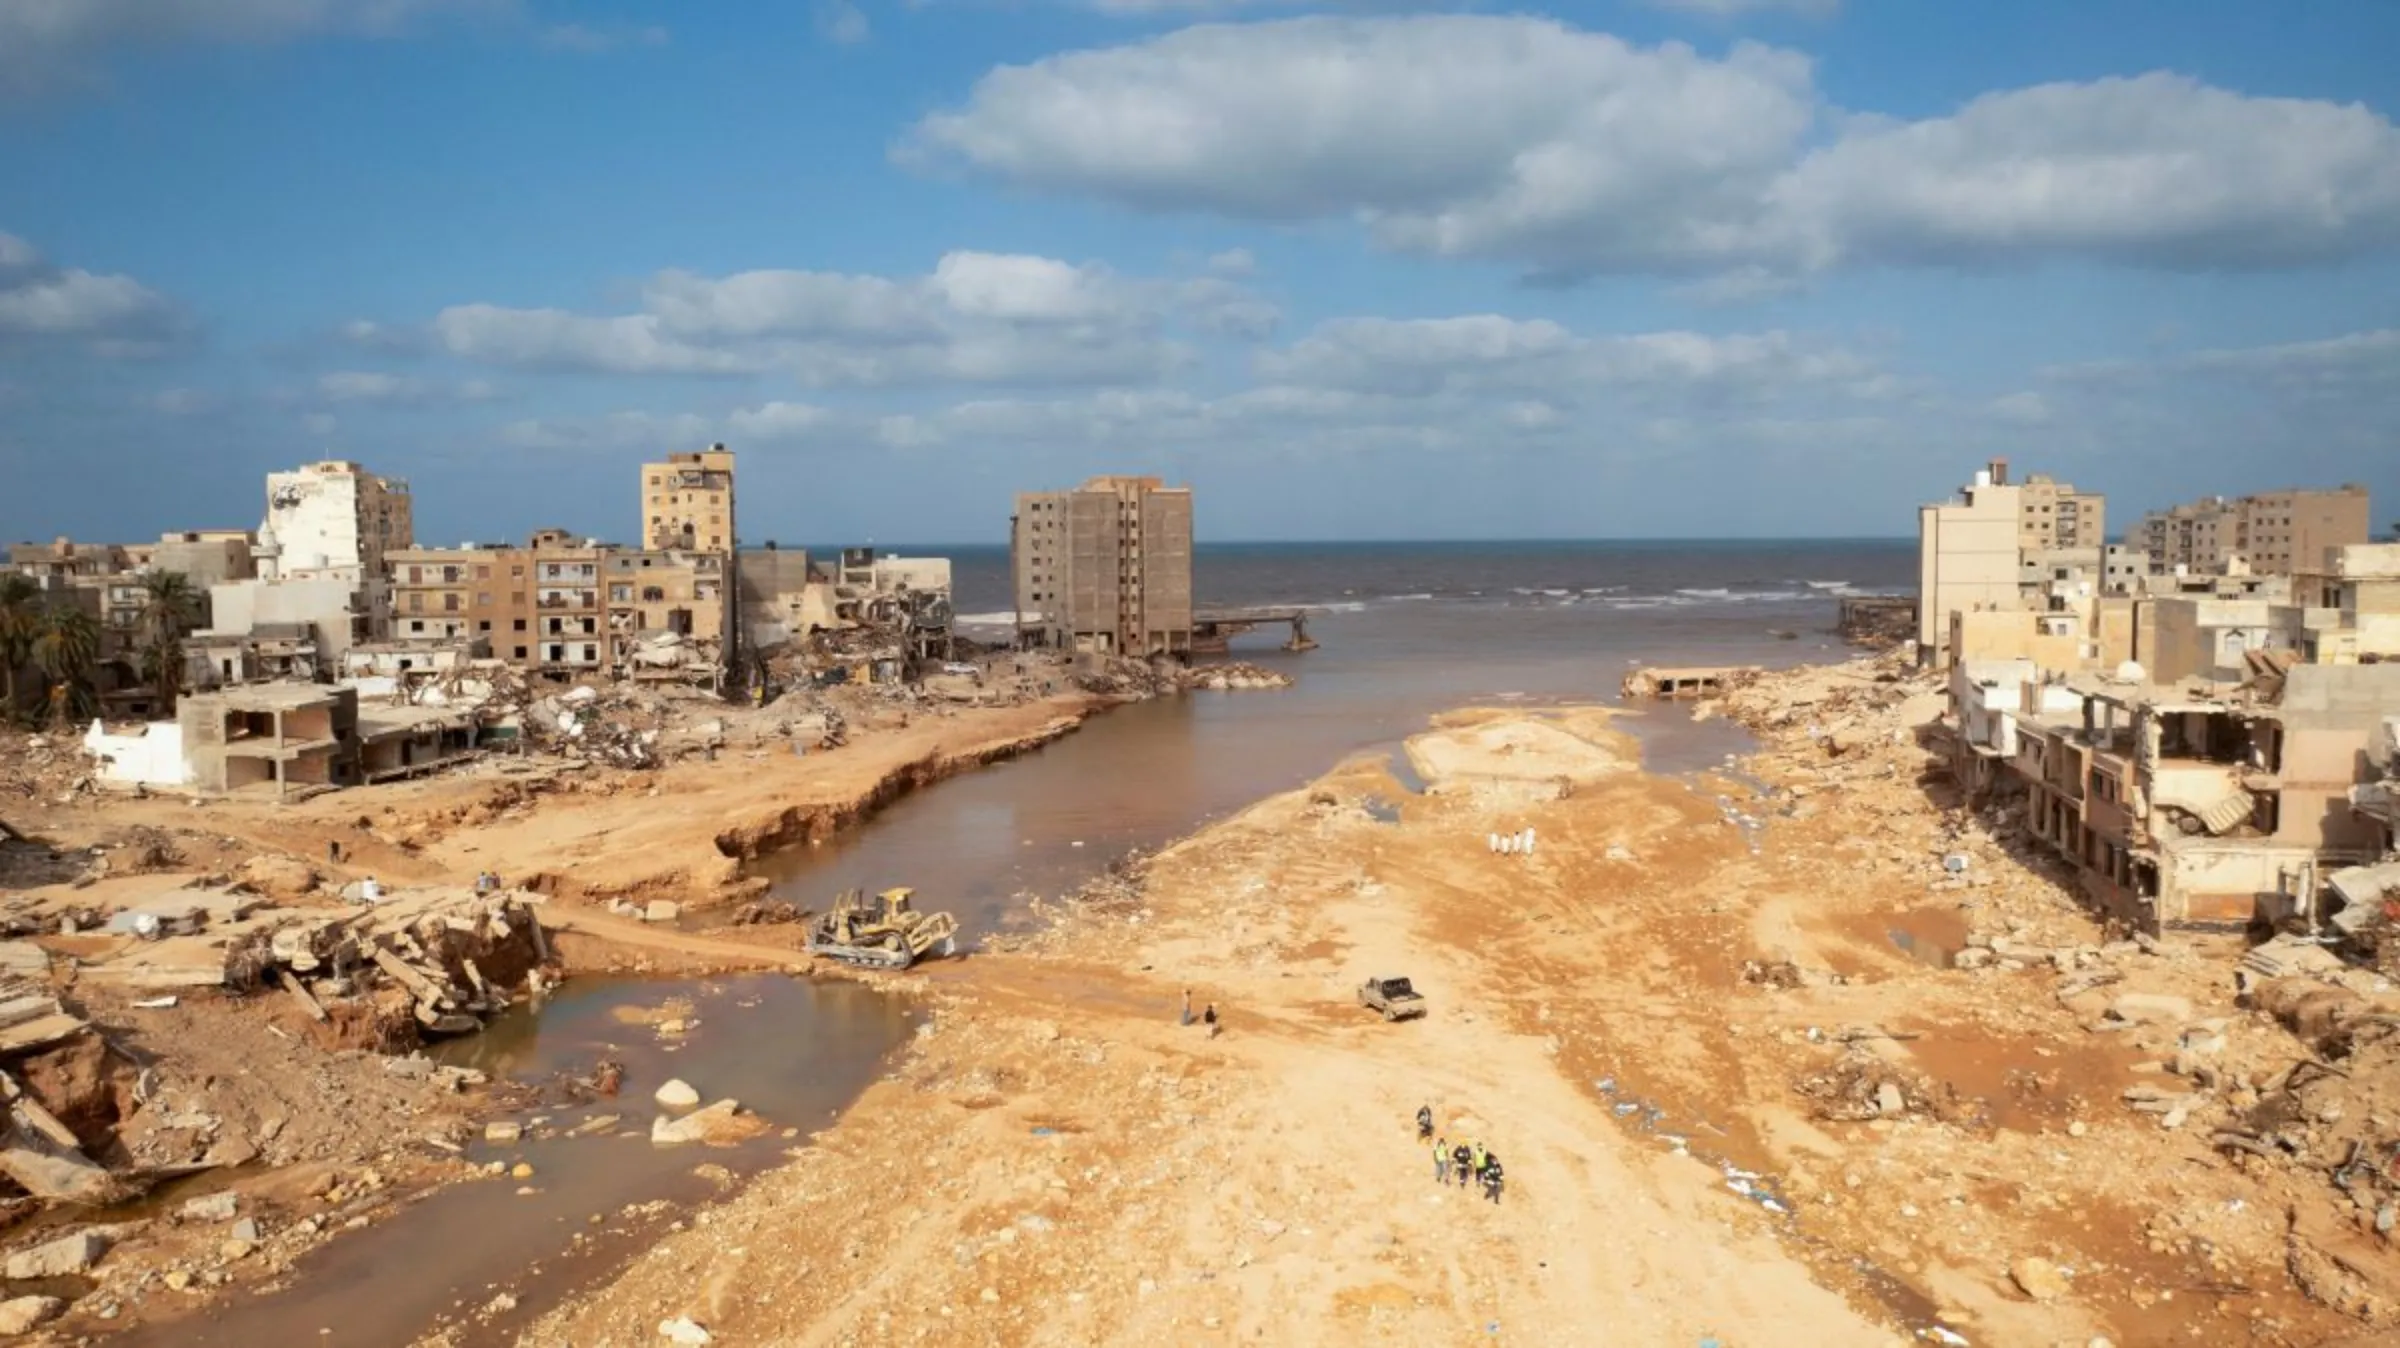 A general view shows destroyed buildings and houses in the aftermath of a deadly storm and flooding, in Derna, Libya September 18, 2023